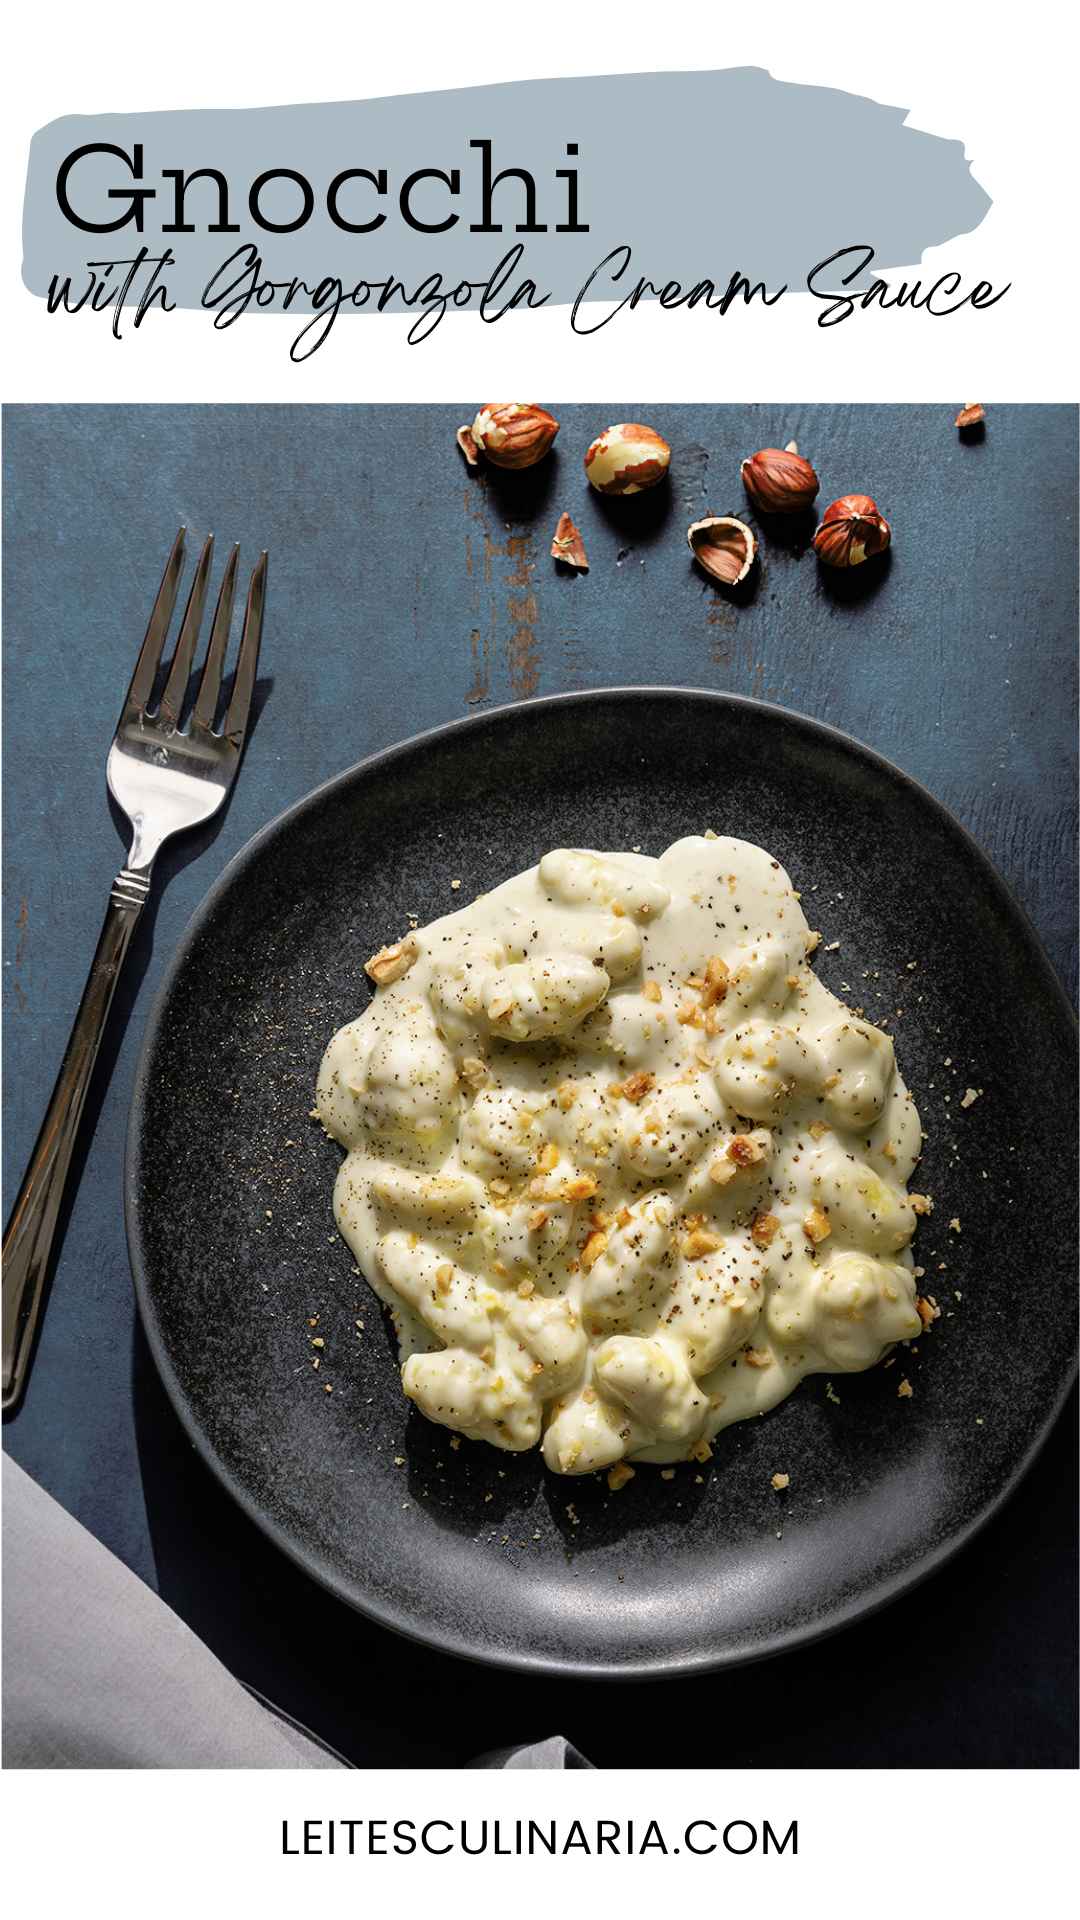 A portion of gnocchi with gorgonzola cream sauce sprinkled with chopped hazelnuts on a black plate.